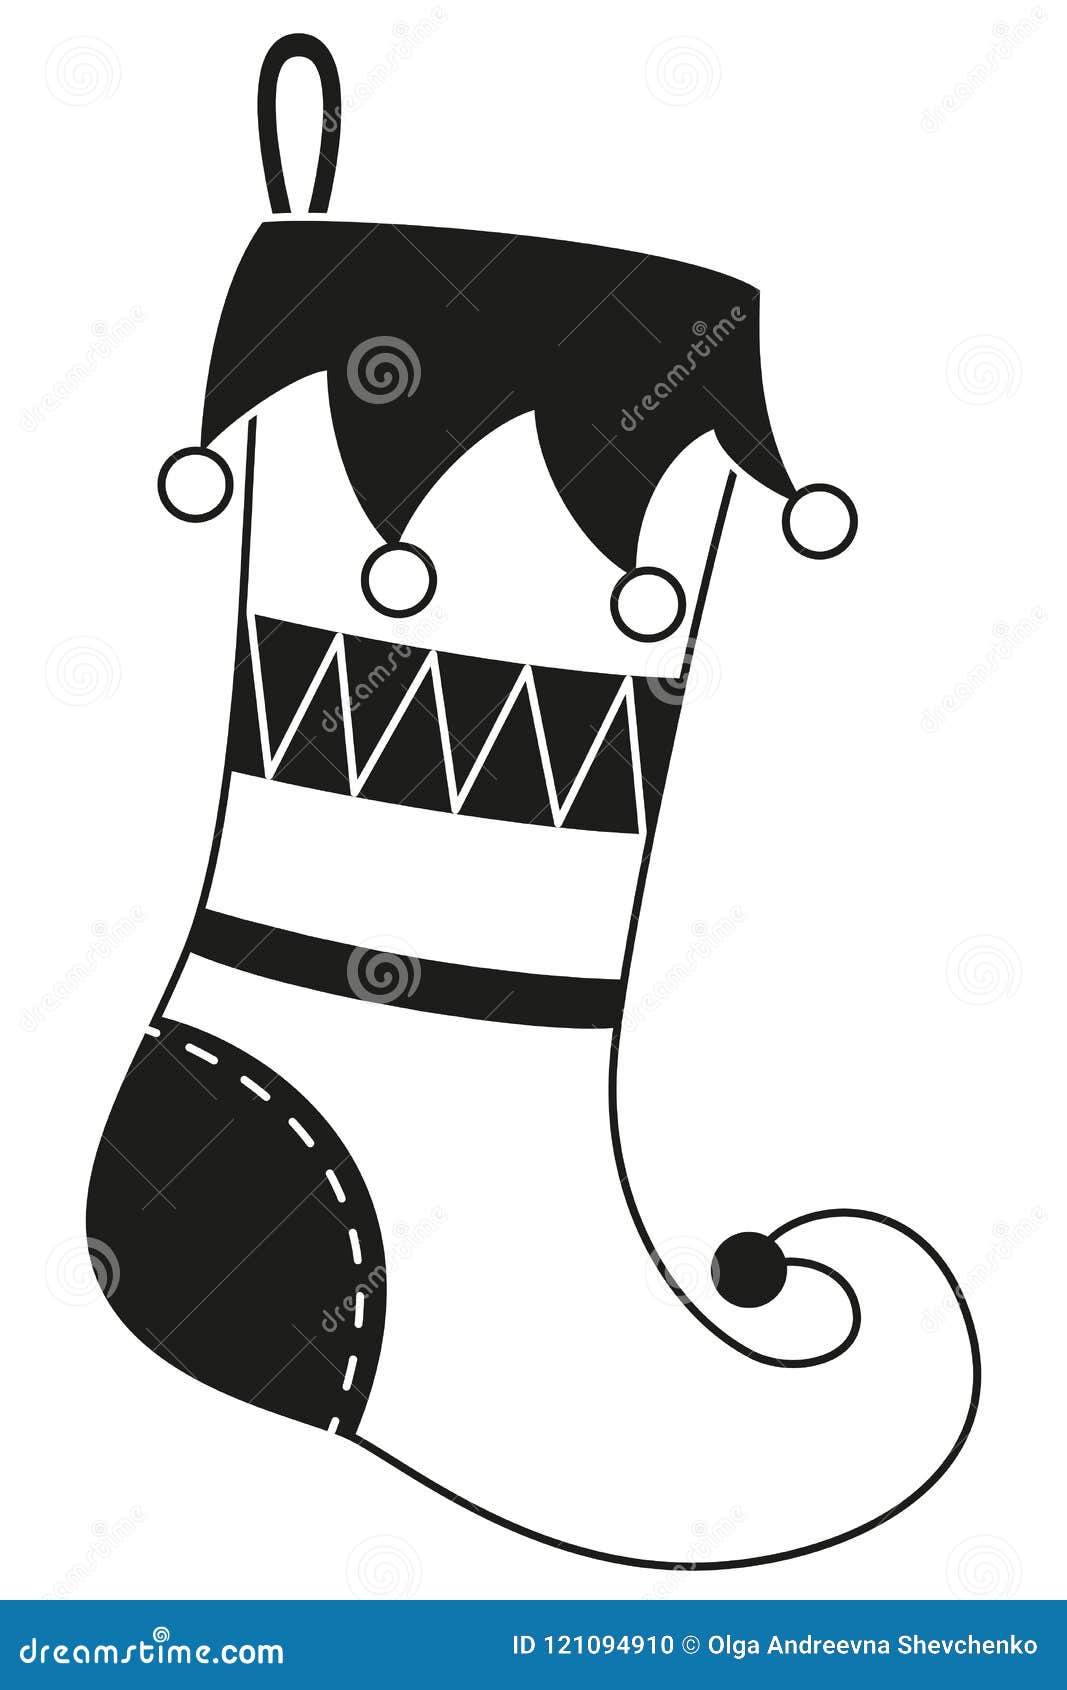 Black And White Cute Christmas Stocking Silhouette Stock